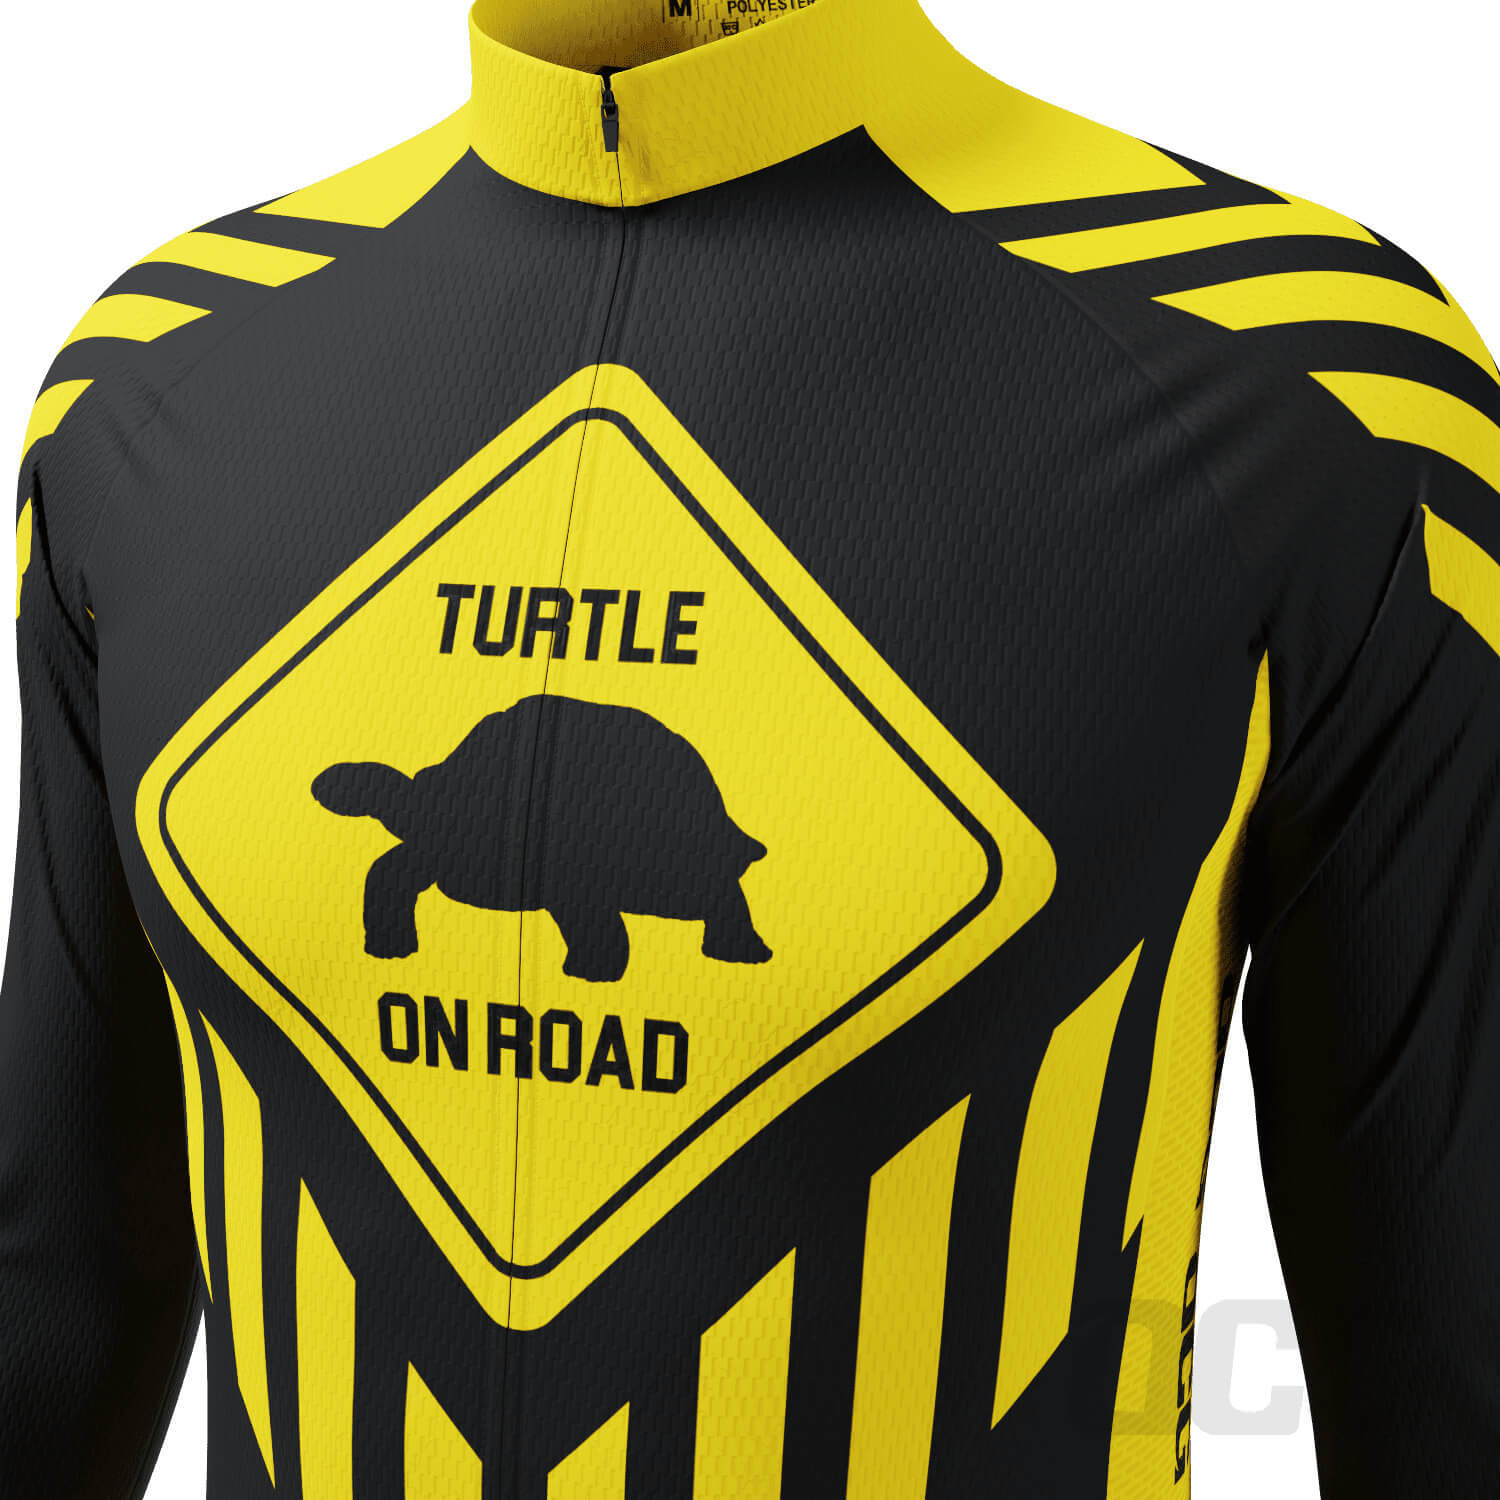 Men's Turtle on Road Long Sleeve Cycling Jersey